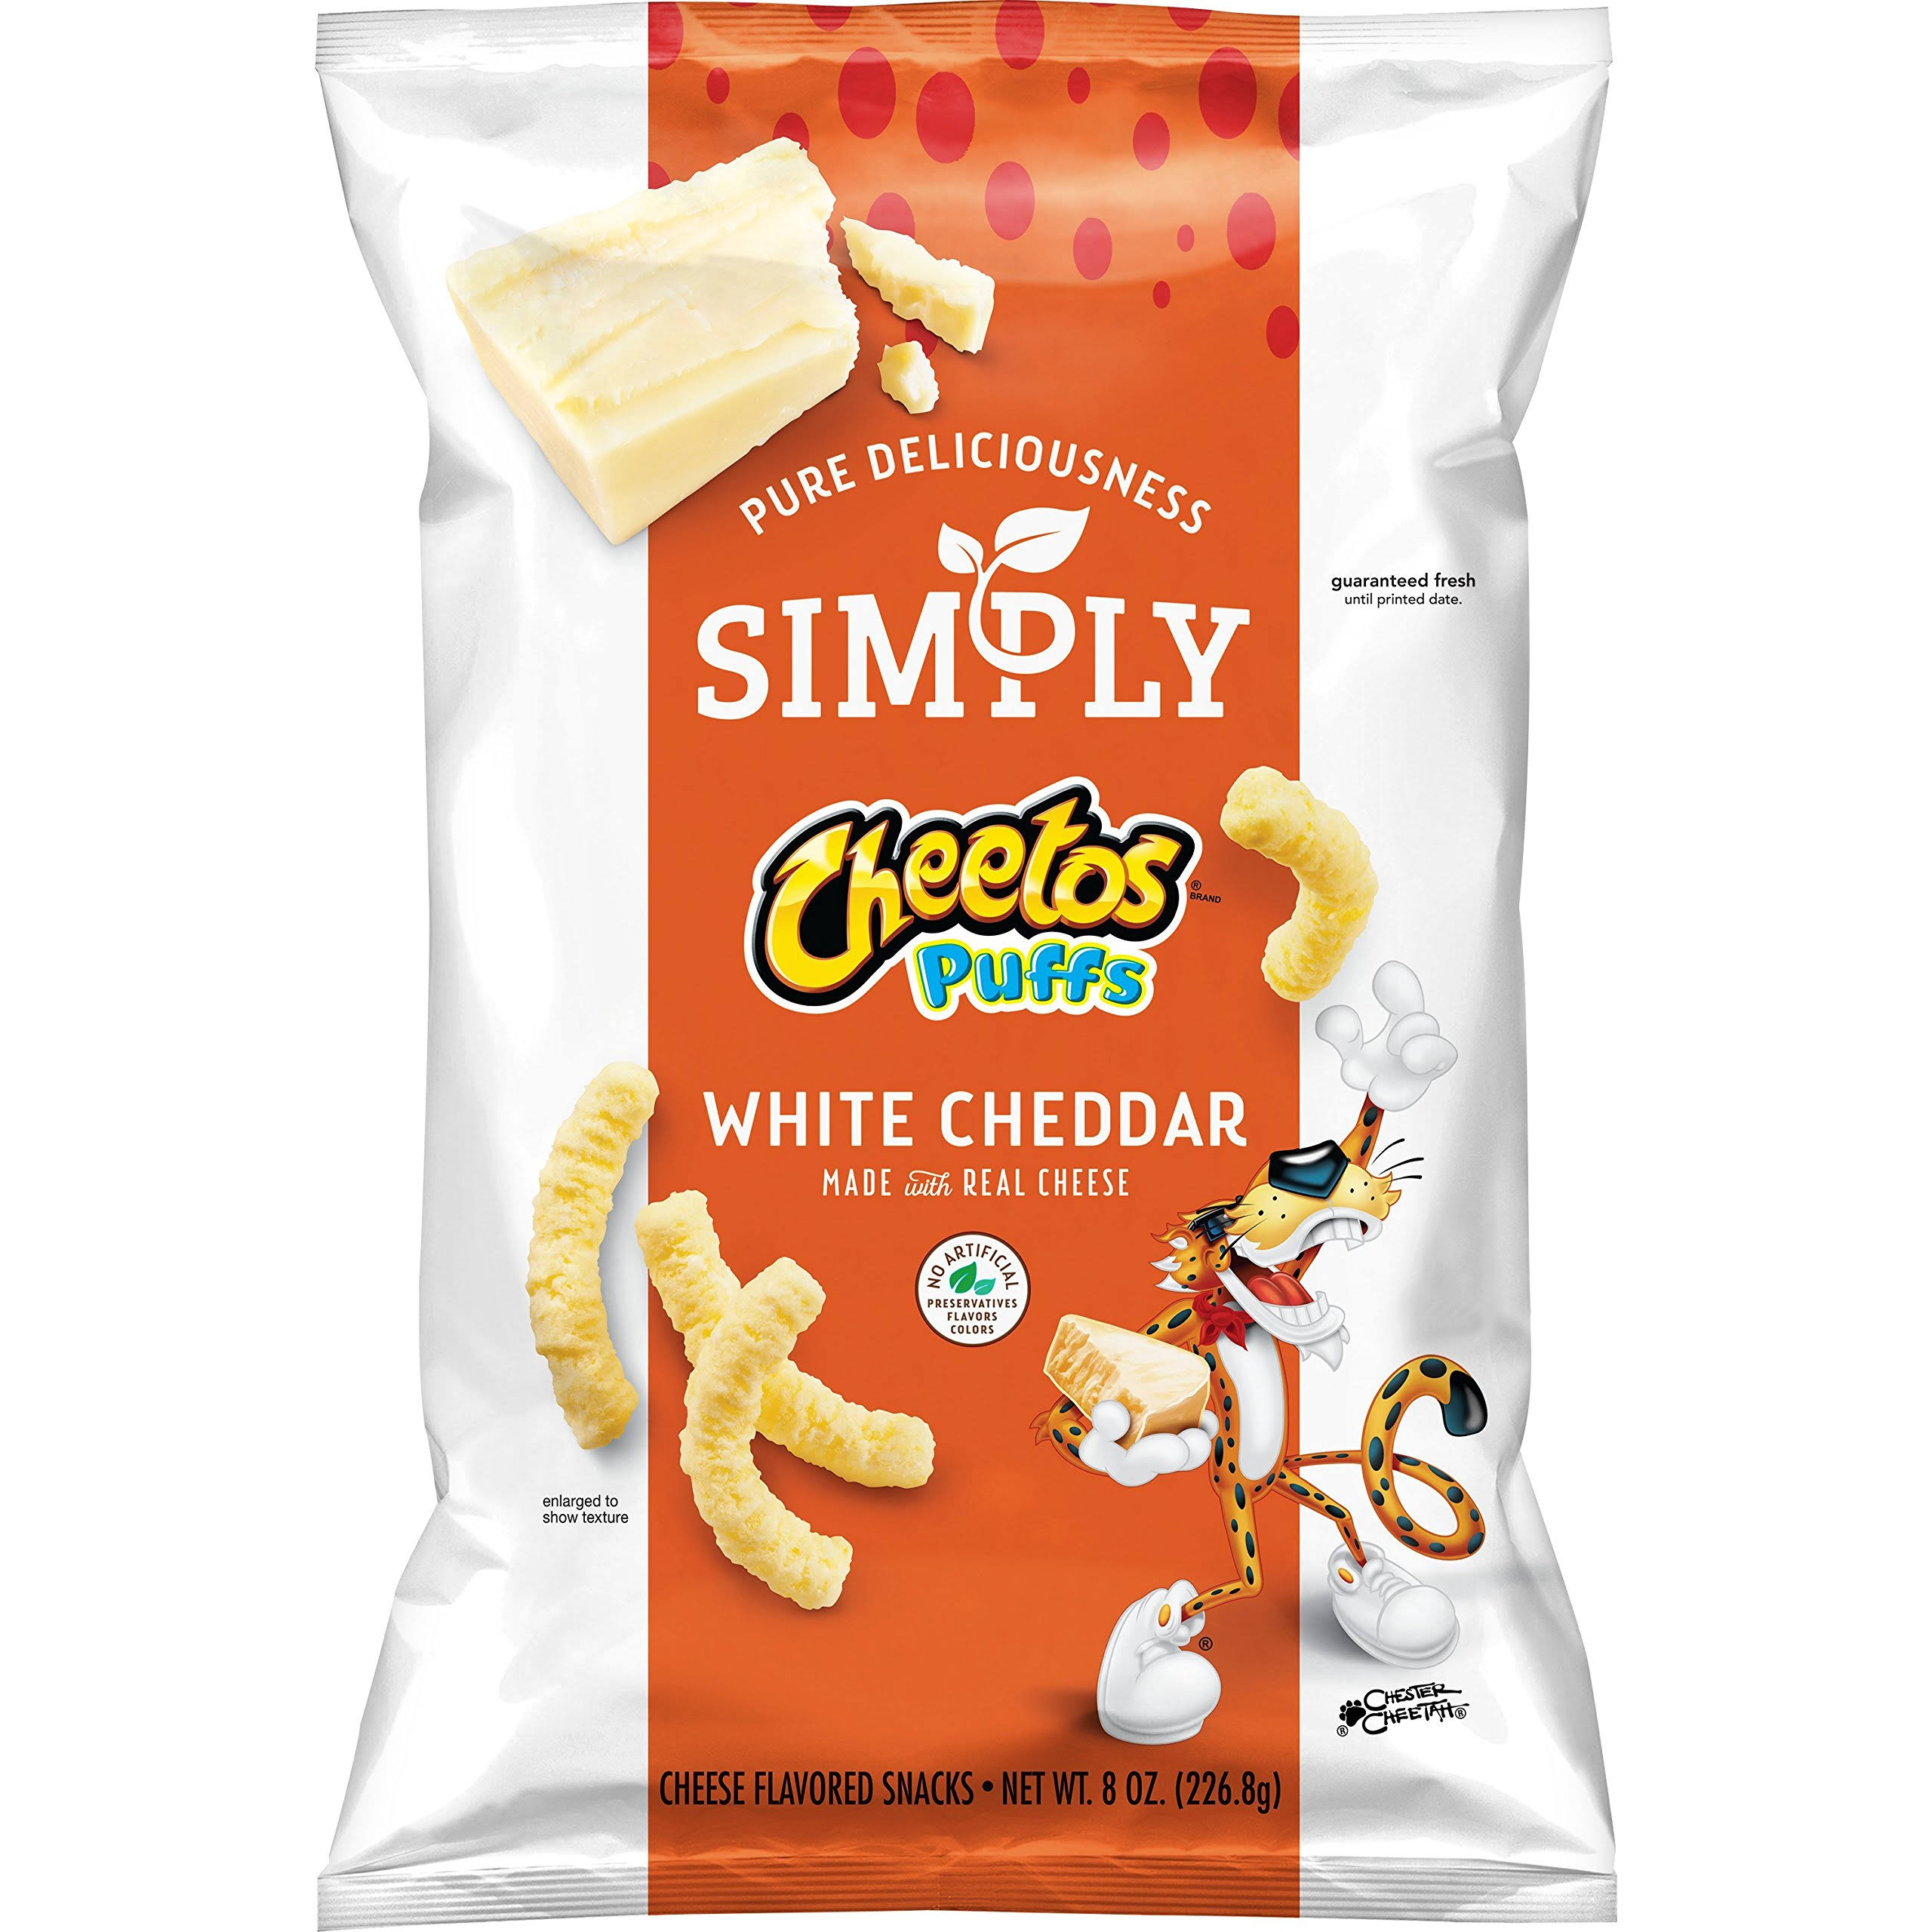 Simply Cheetos Puffs Snacks - White Cheddar Cheese Flavored, 8oz